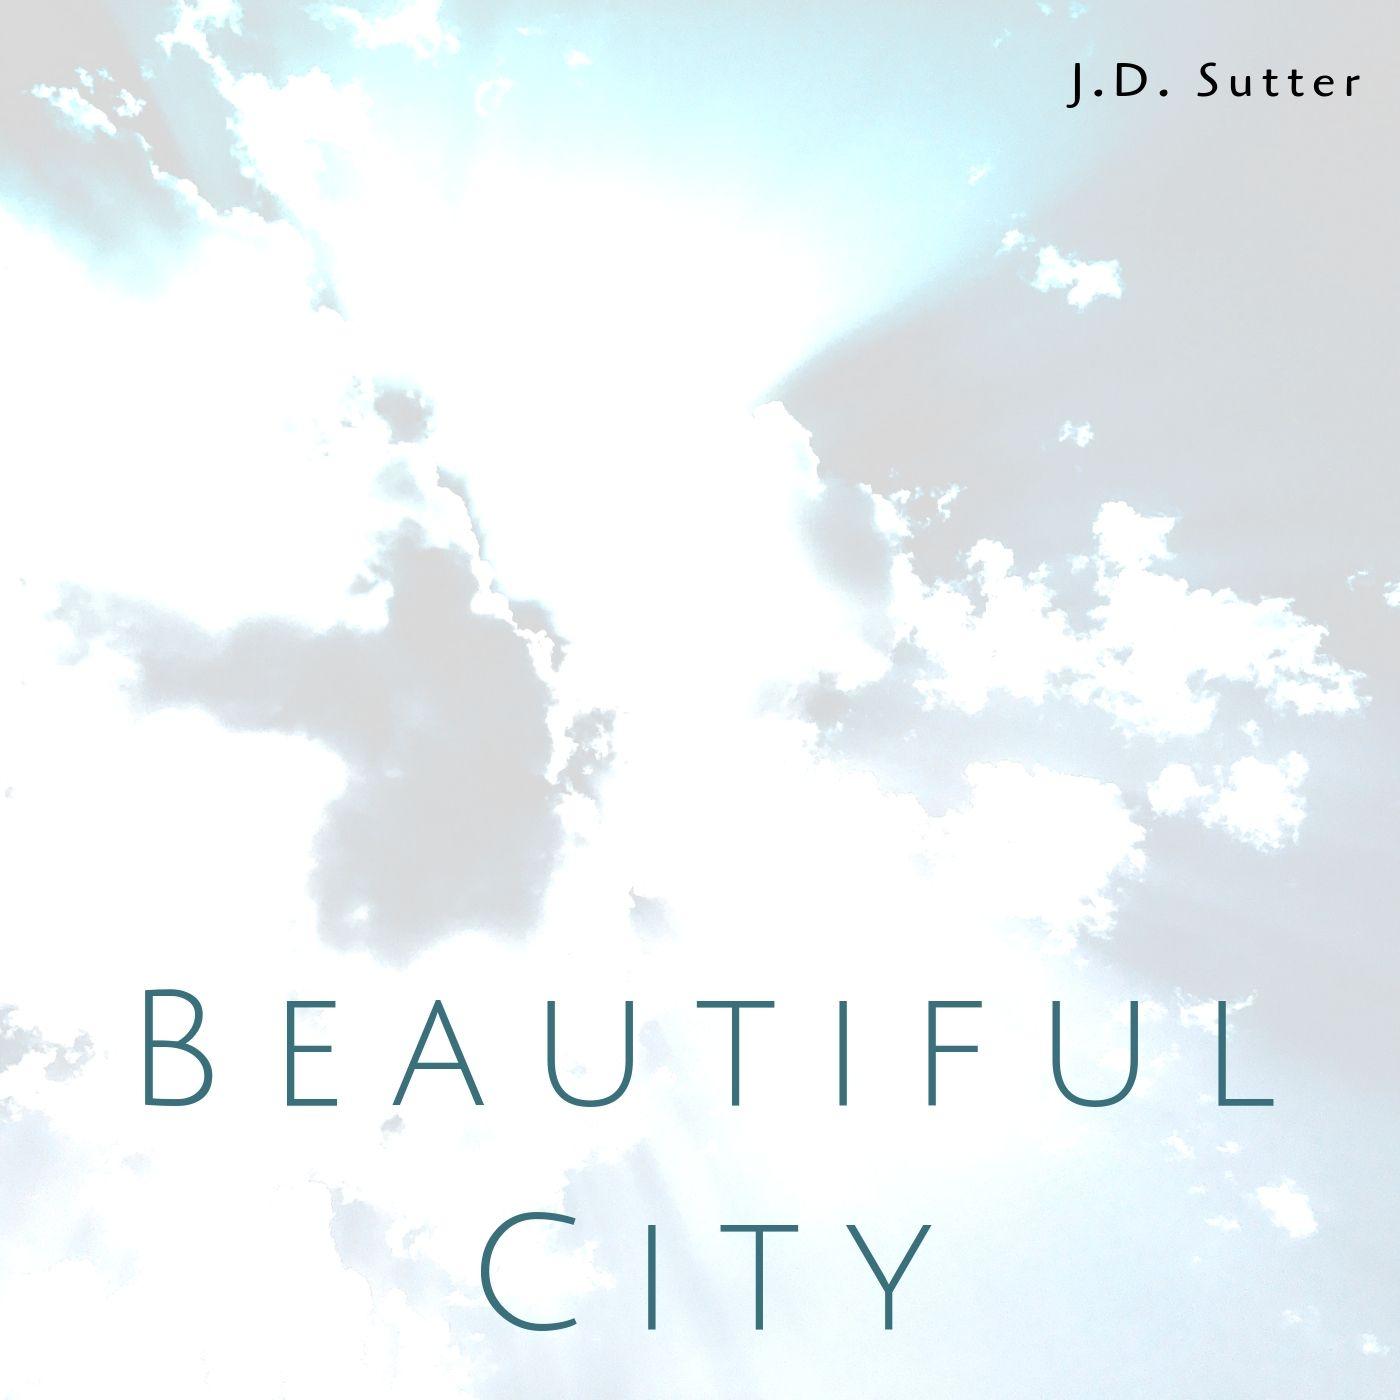 "Beautiful City" from Godspell | Cover by J.D. Sutter